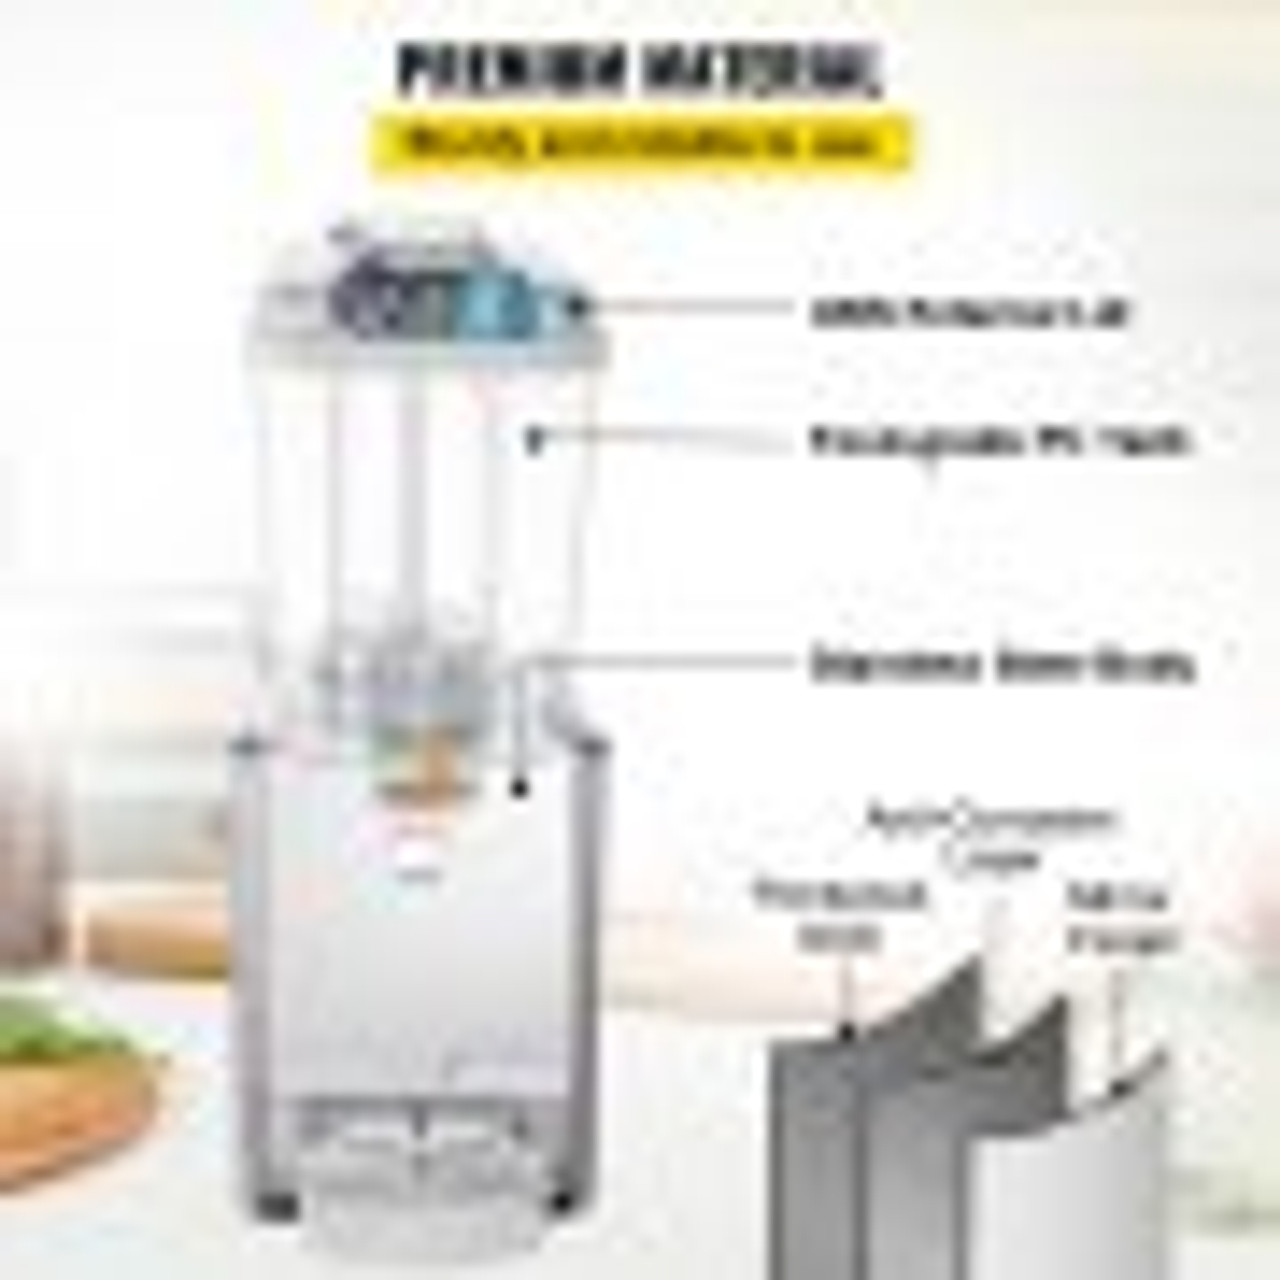 Commercial Beverage Dispenser, 4.8 Gallon 1 Tank Cold Beverage Dispenser, 200W Food Grade Material Stainless Steel Commercial Juice Dispenser With Thermostat Controller for Cold Drink